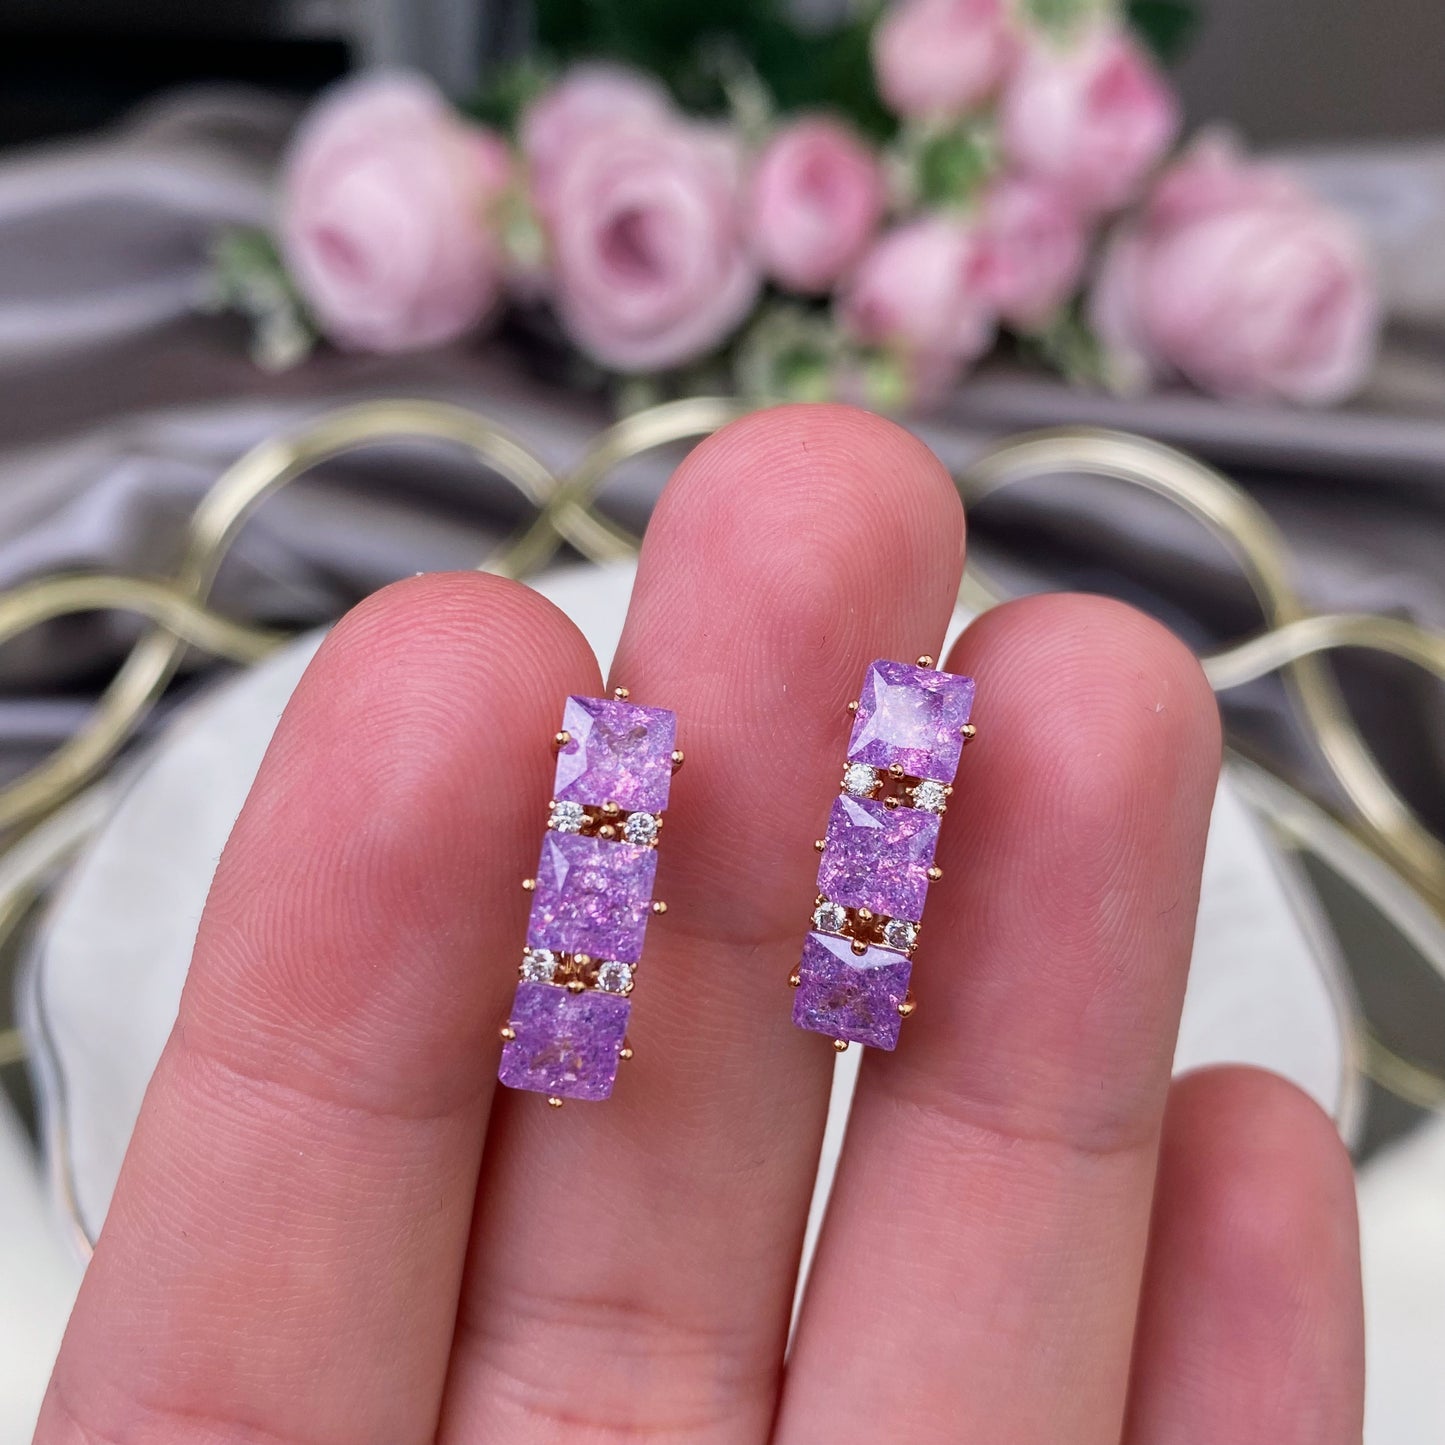 Gold plated earrings with violet decorative crystals